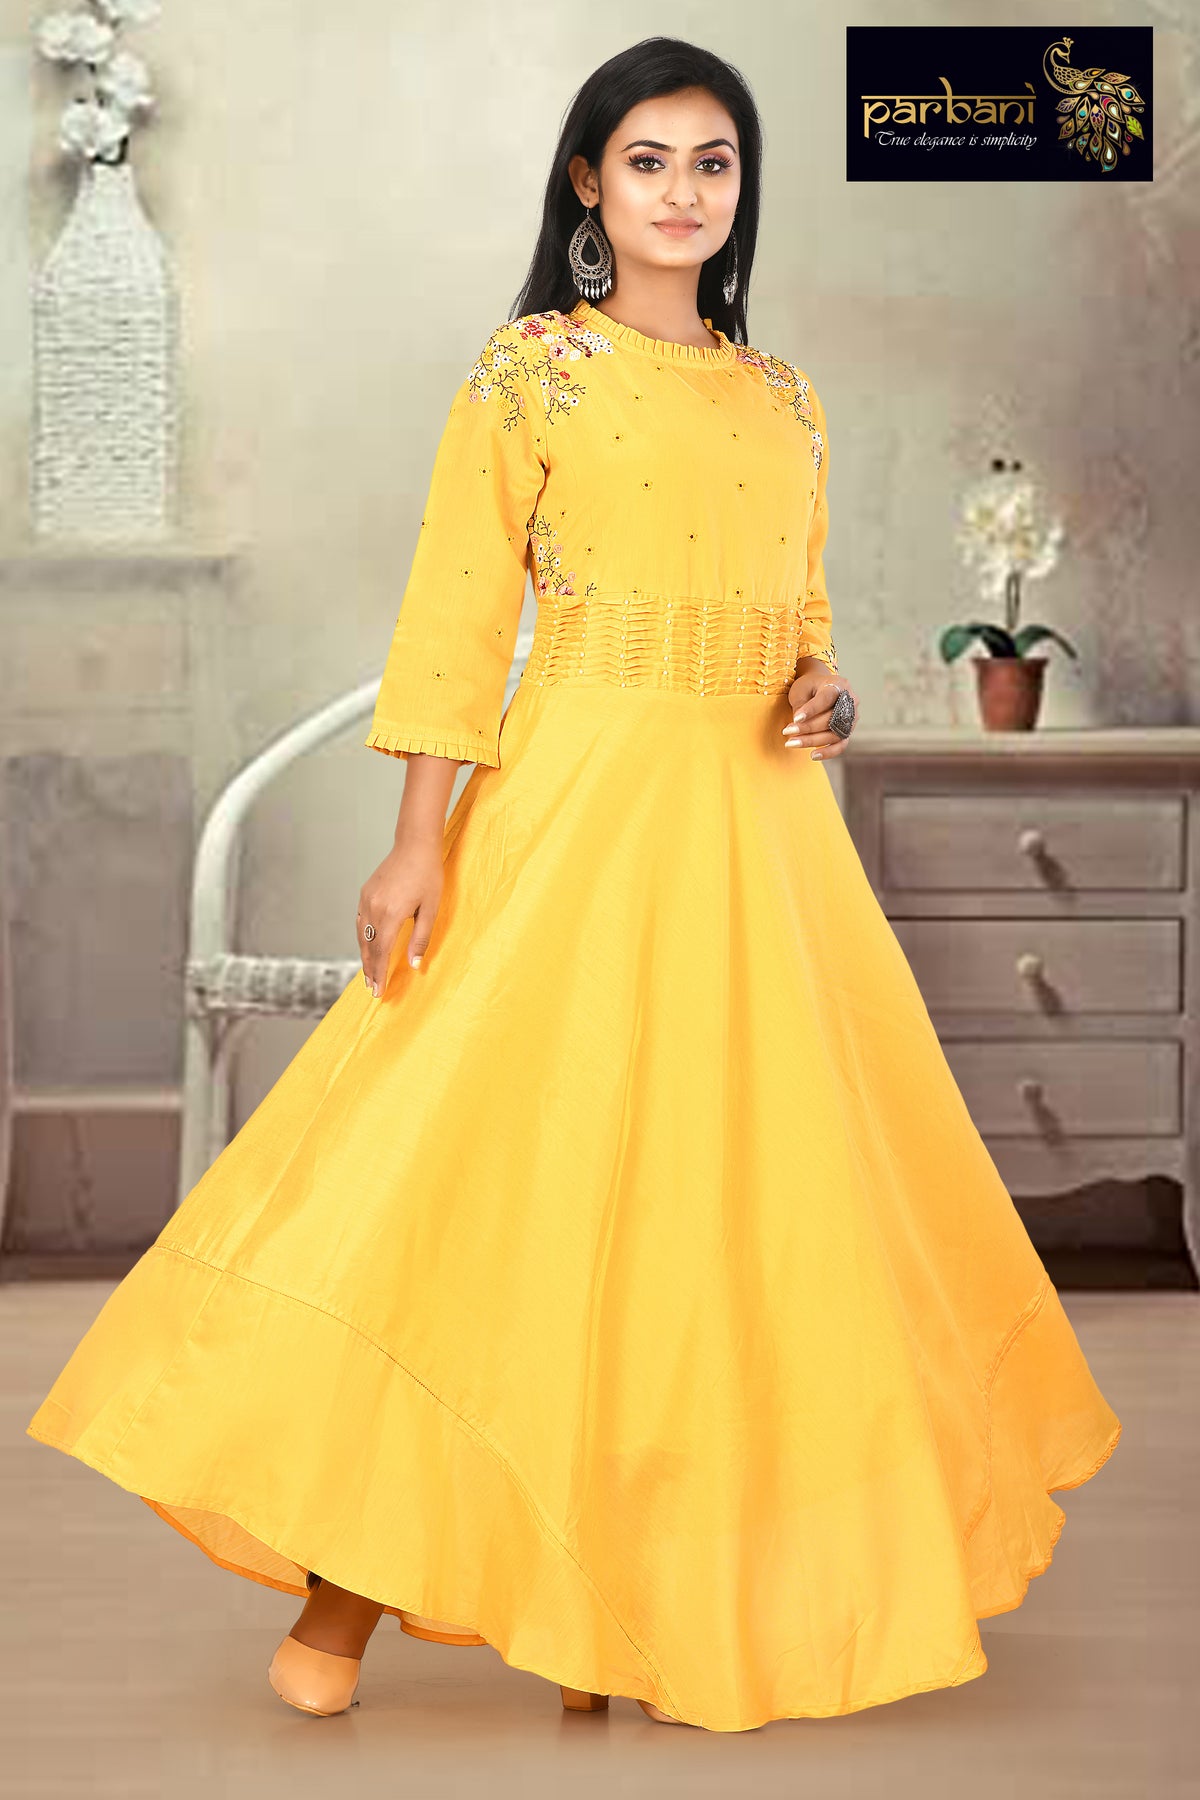 Yellow Satin One Shoulder Satin Prom Dresses 2022 With Slit 2021 A Line  Full Length Evening Gown With Big Bow For Womens Formal Party Sexy And  Elegant Robe De Soirée From Bridalstore,